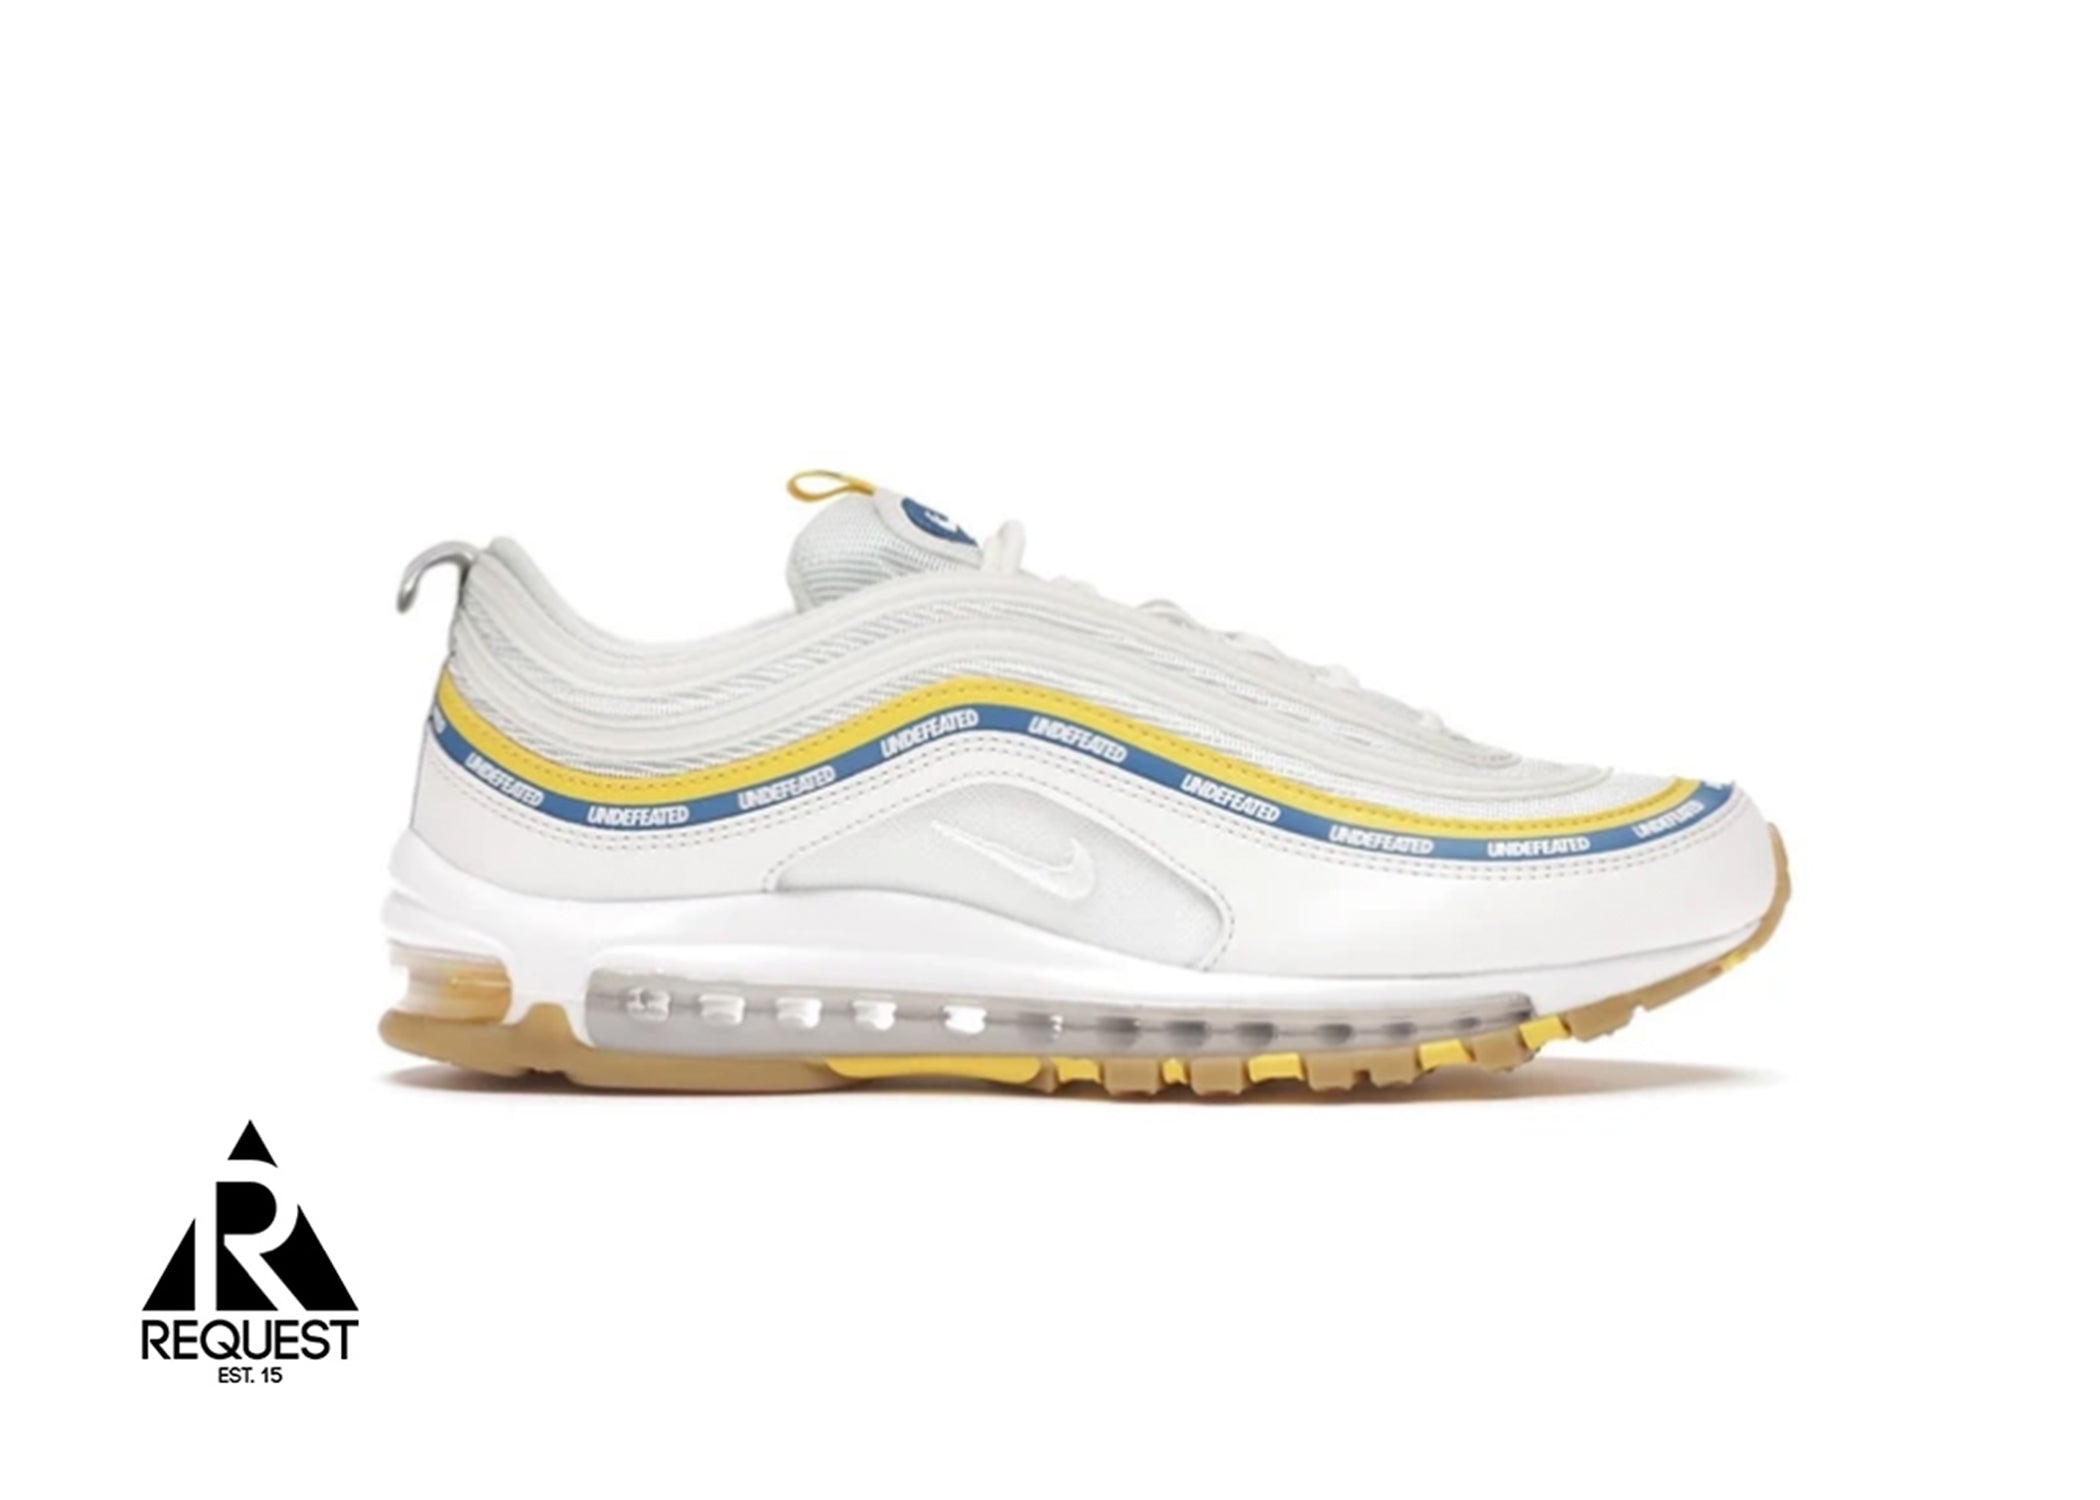 Nike Air Max 97 “Undefeated UCLA”